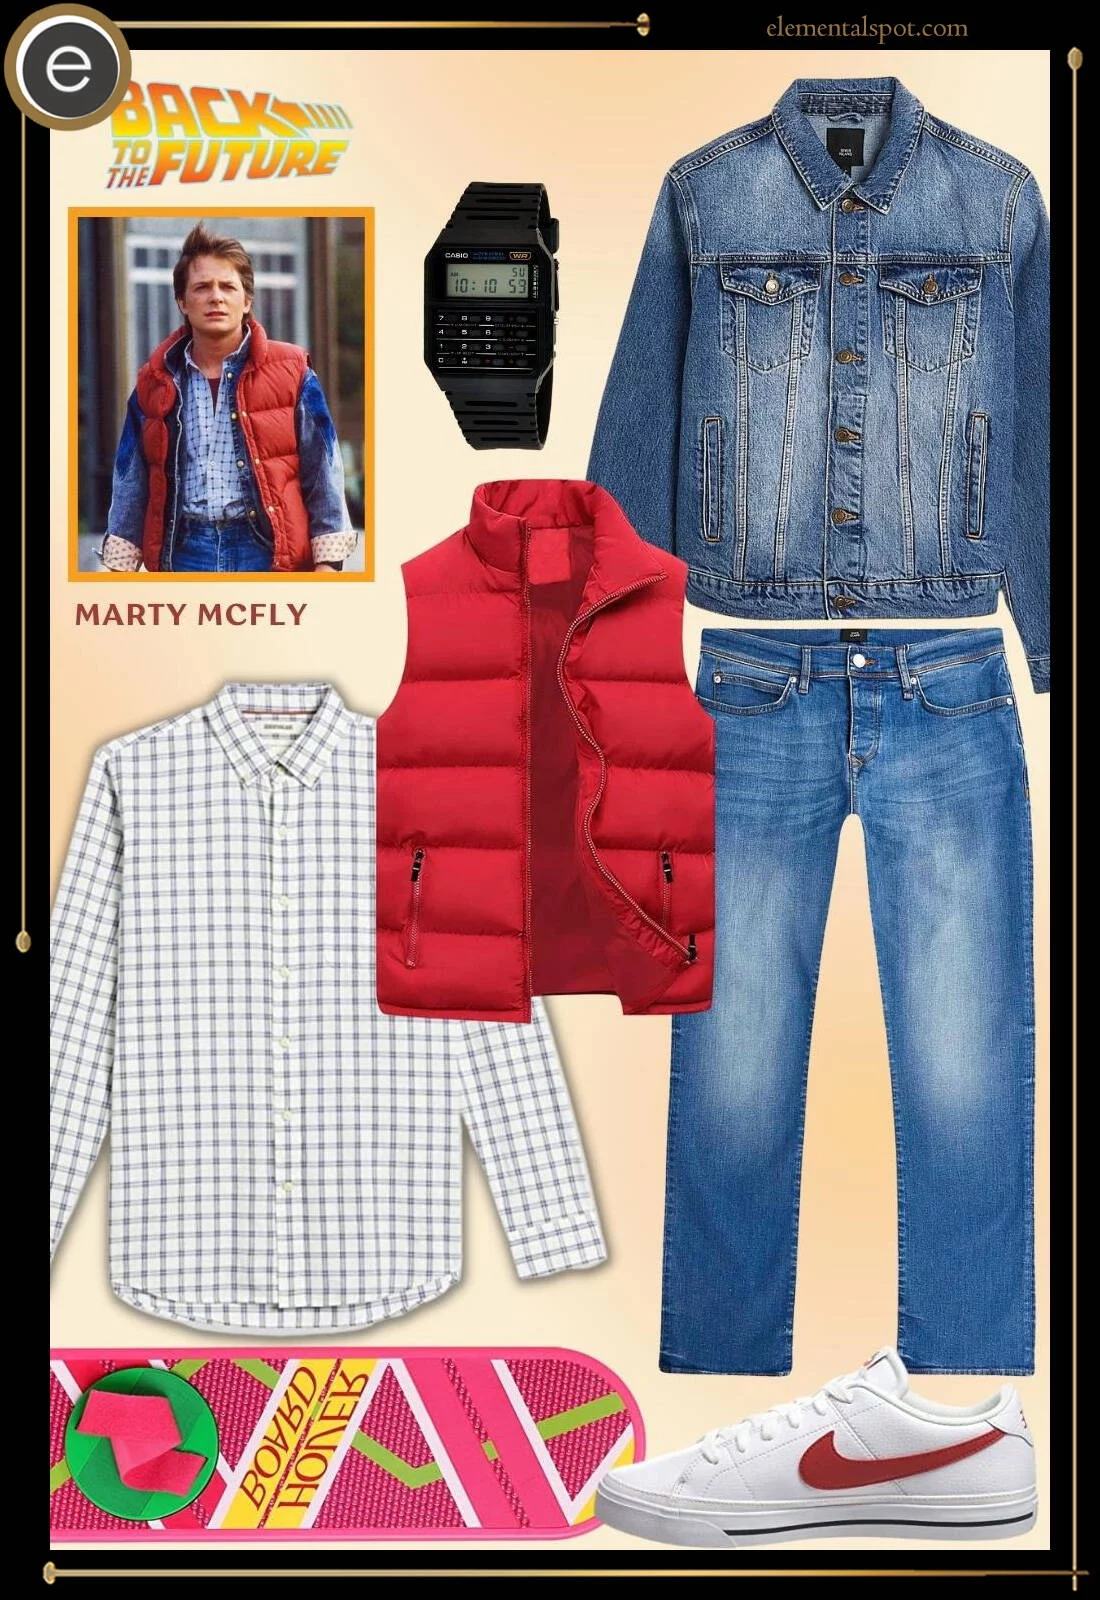 Dress Up Like Marty Mcfly from Back To The Future - Elemental Spot